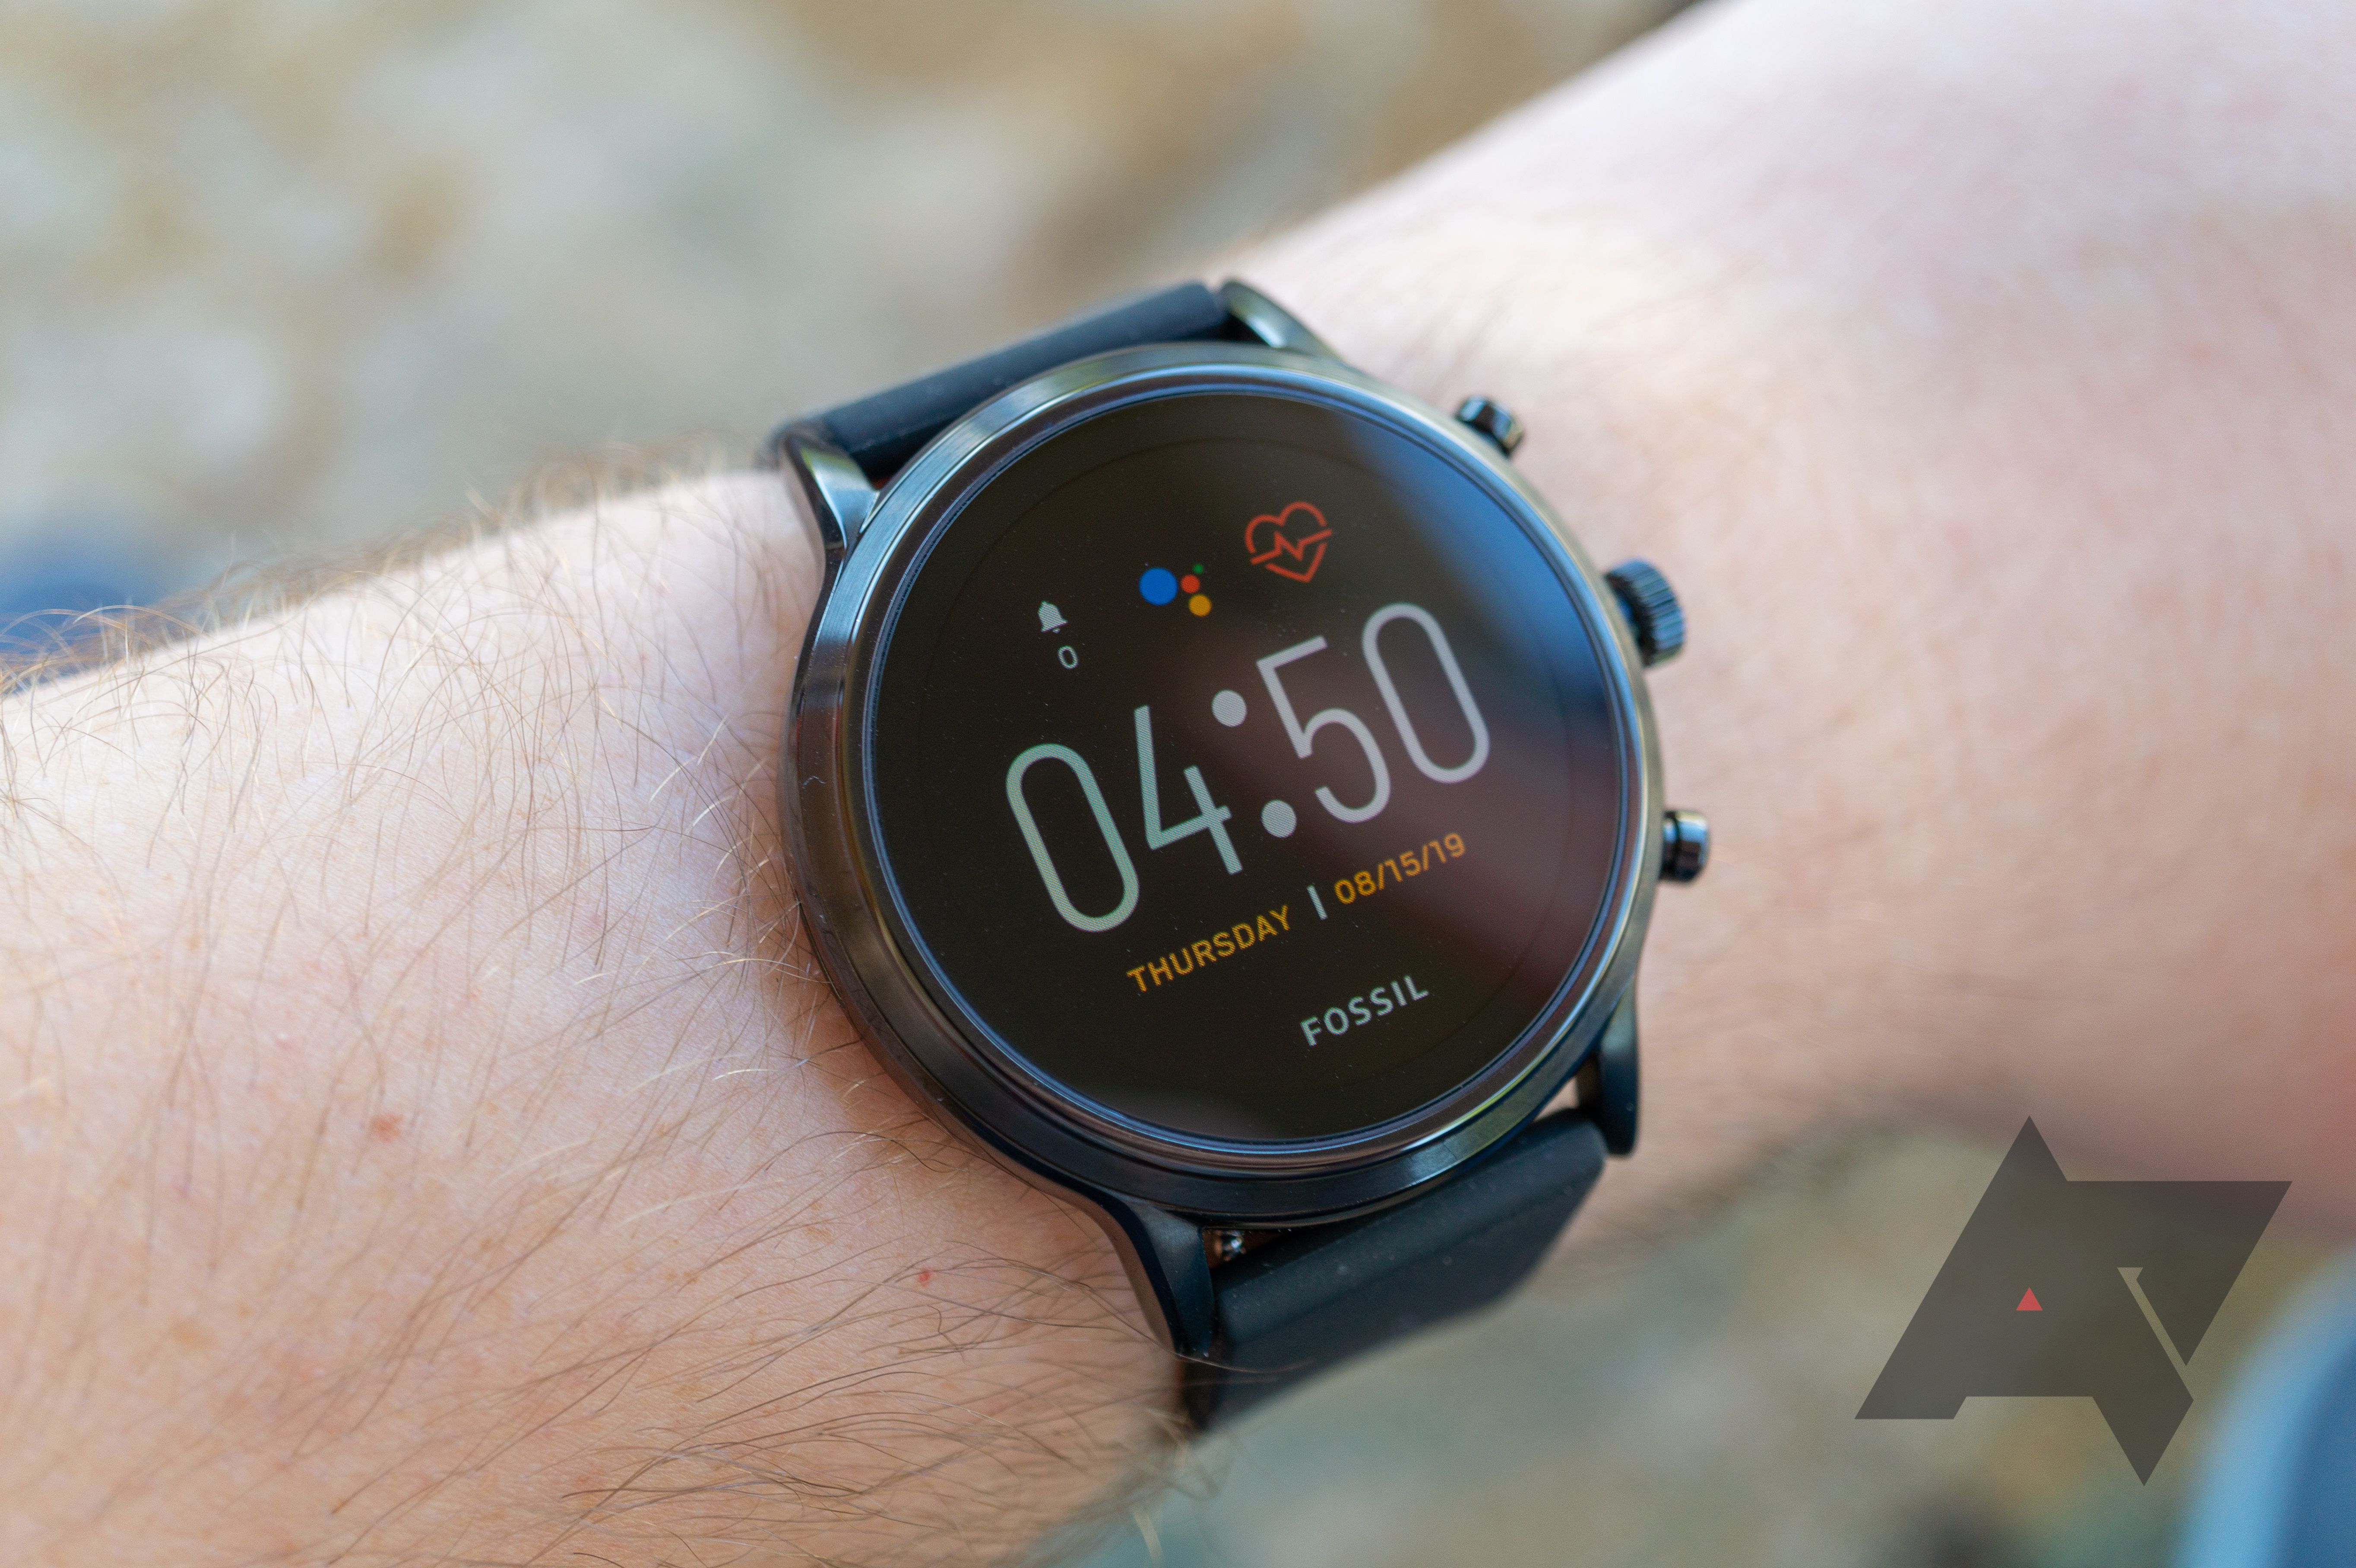 Fossil removed more than half of its watch faces from Gen 5 wearables in  latest update